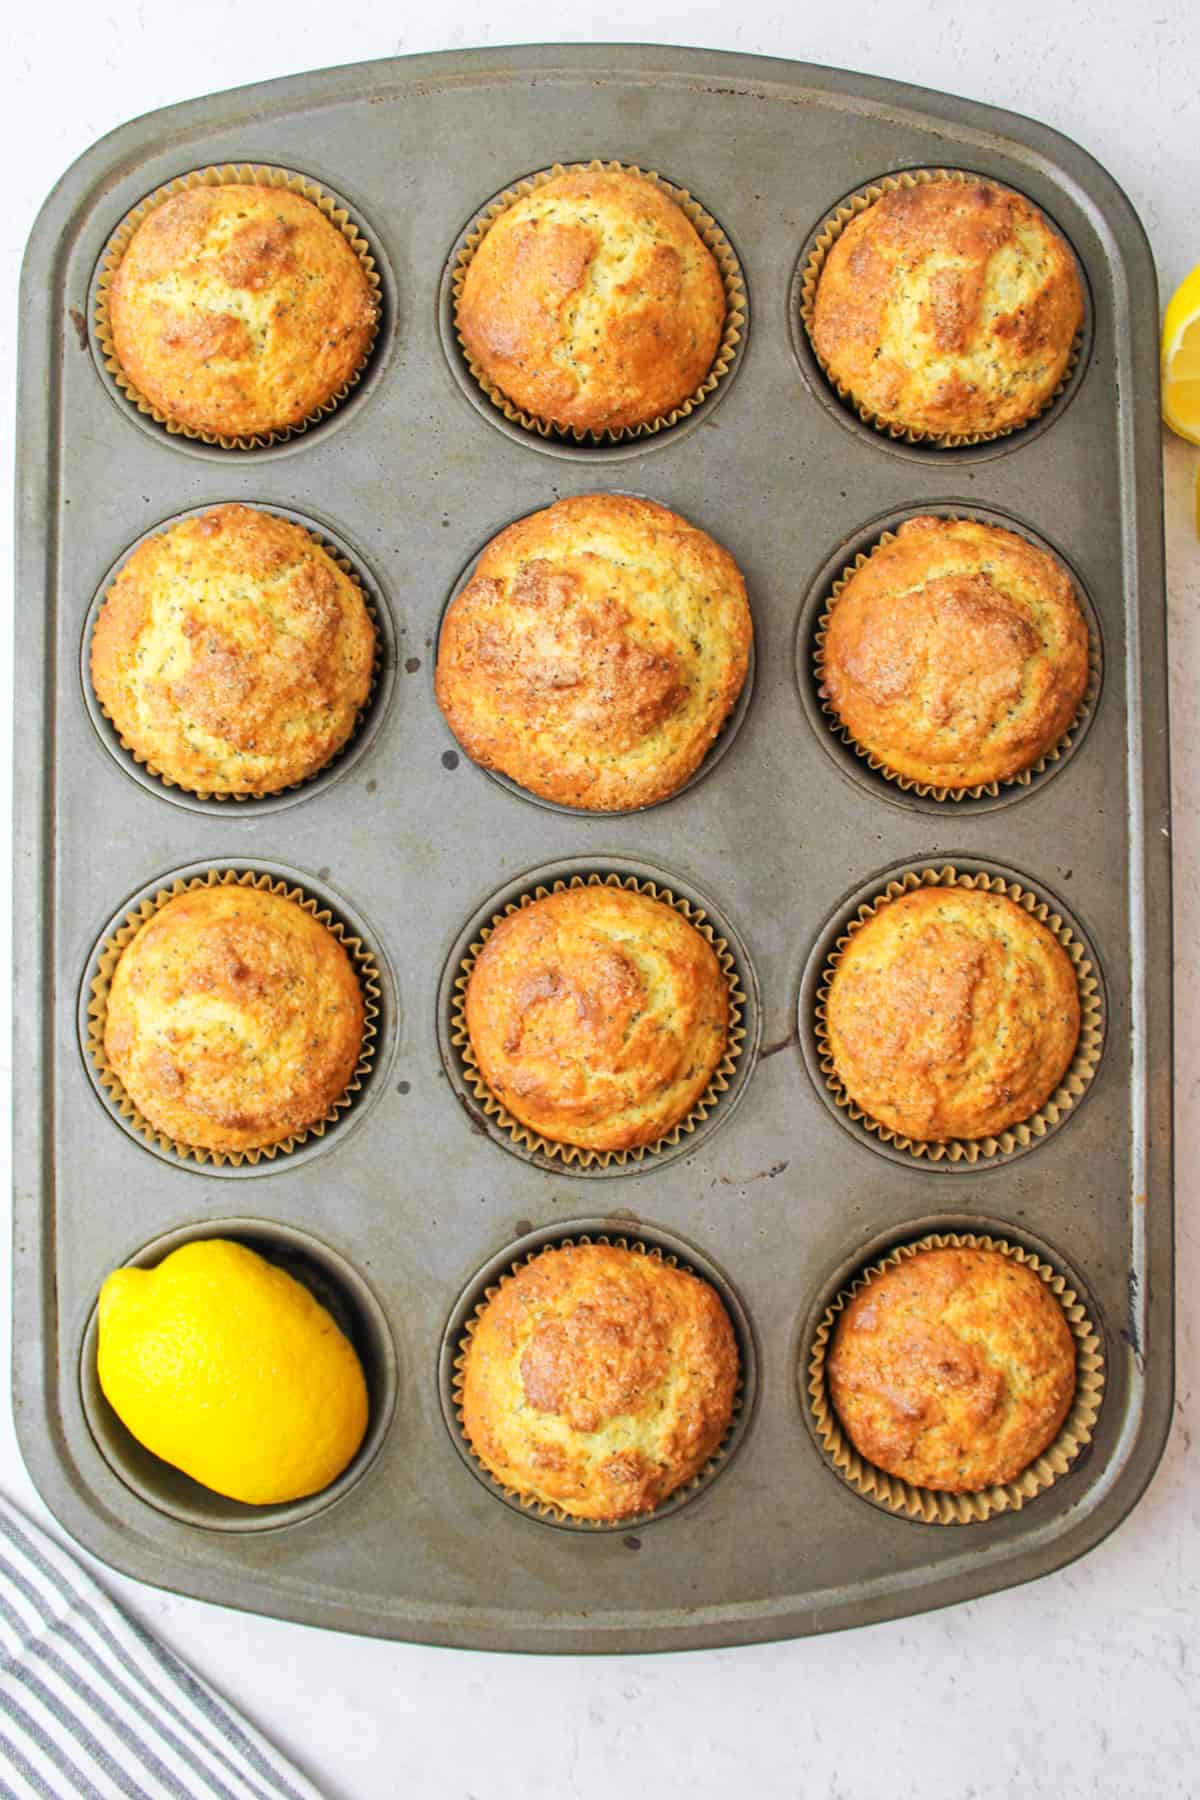 baked lemon poppy seed muffins in a muffin pan with a fresh lemon in one of the muffin spots